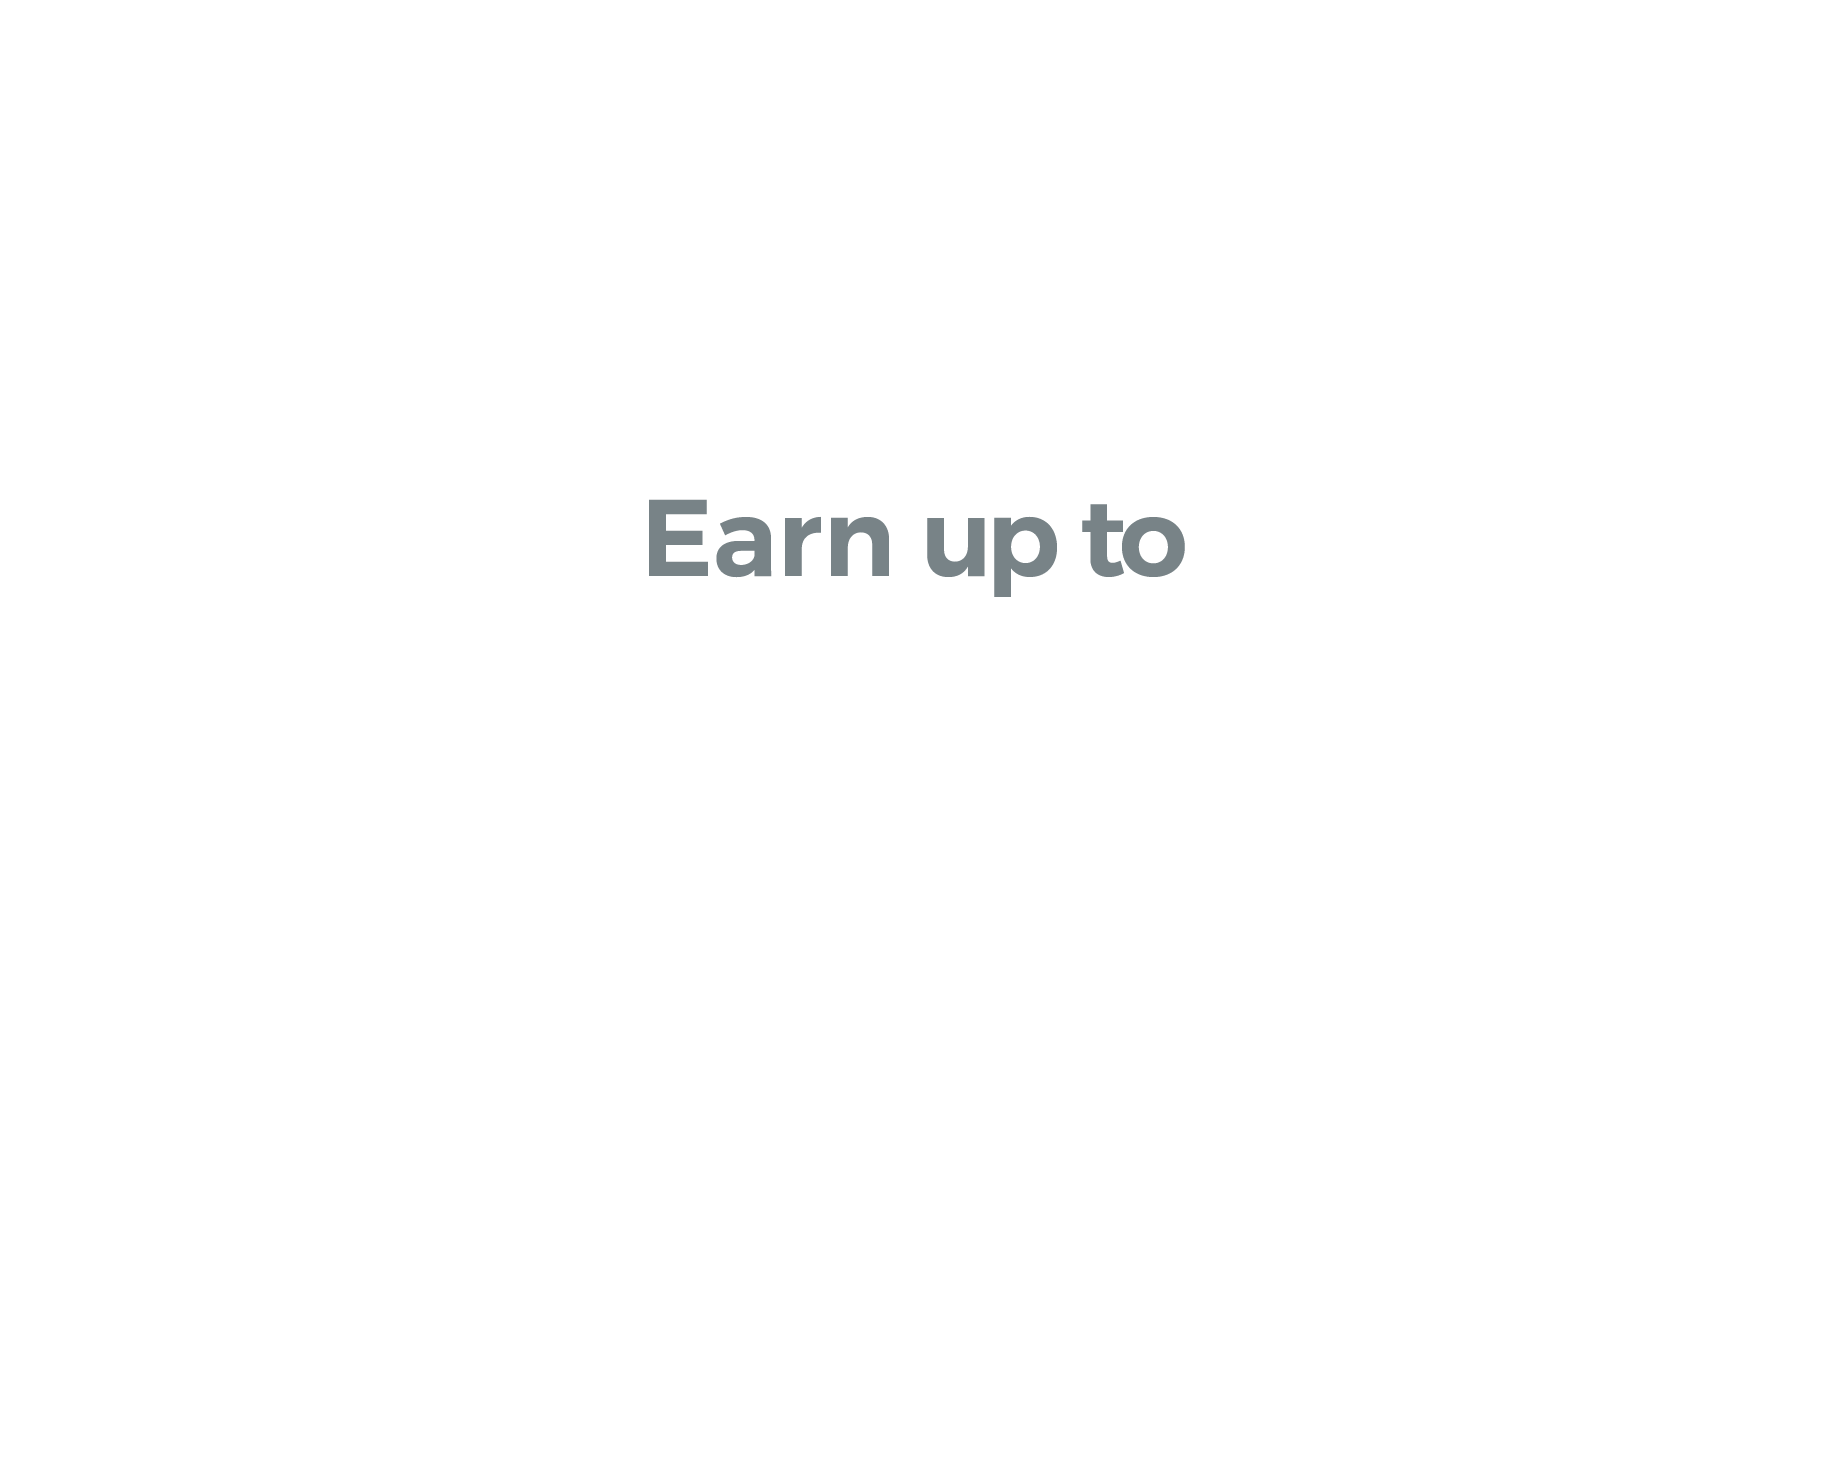 Special High Yield Savings Account Offer